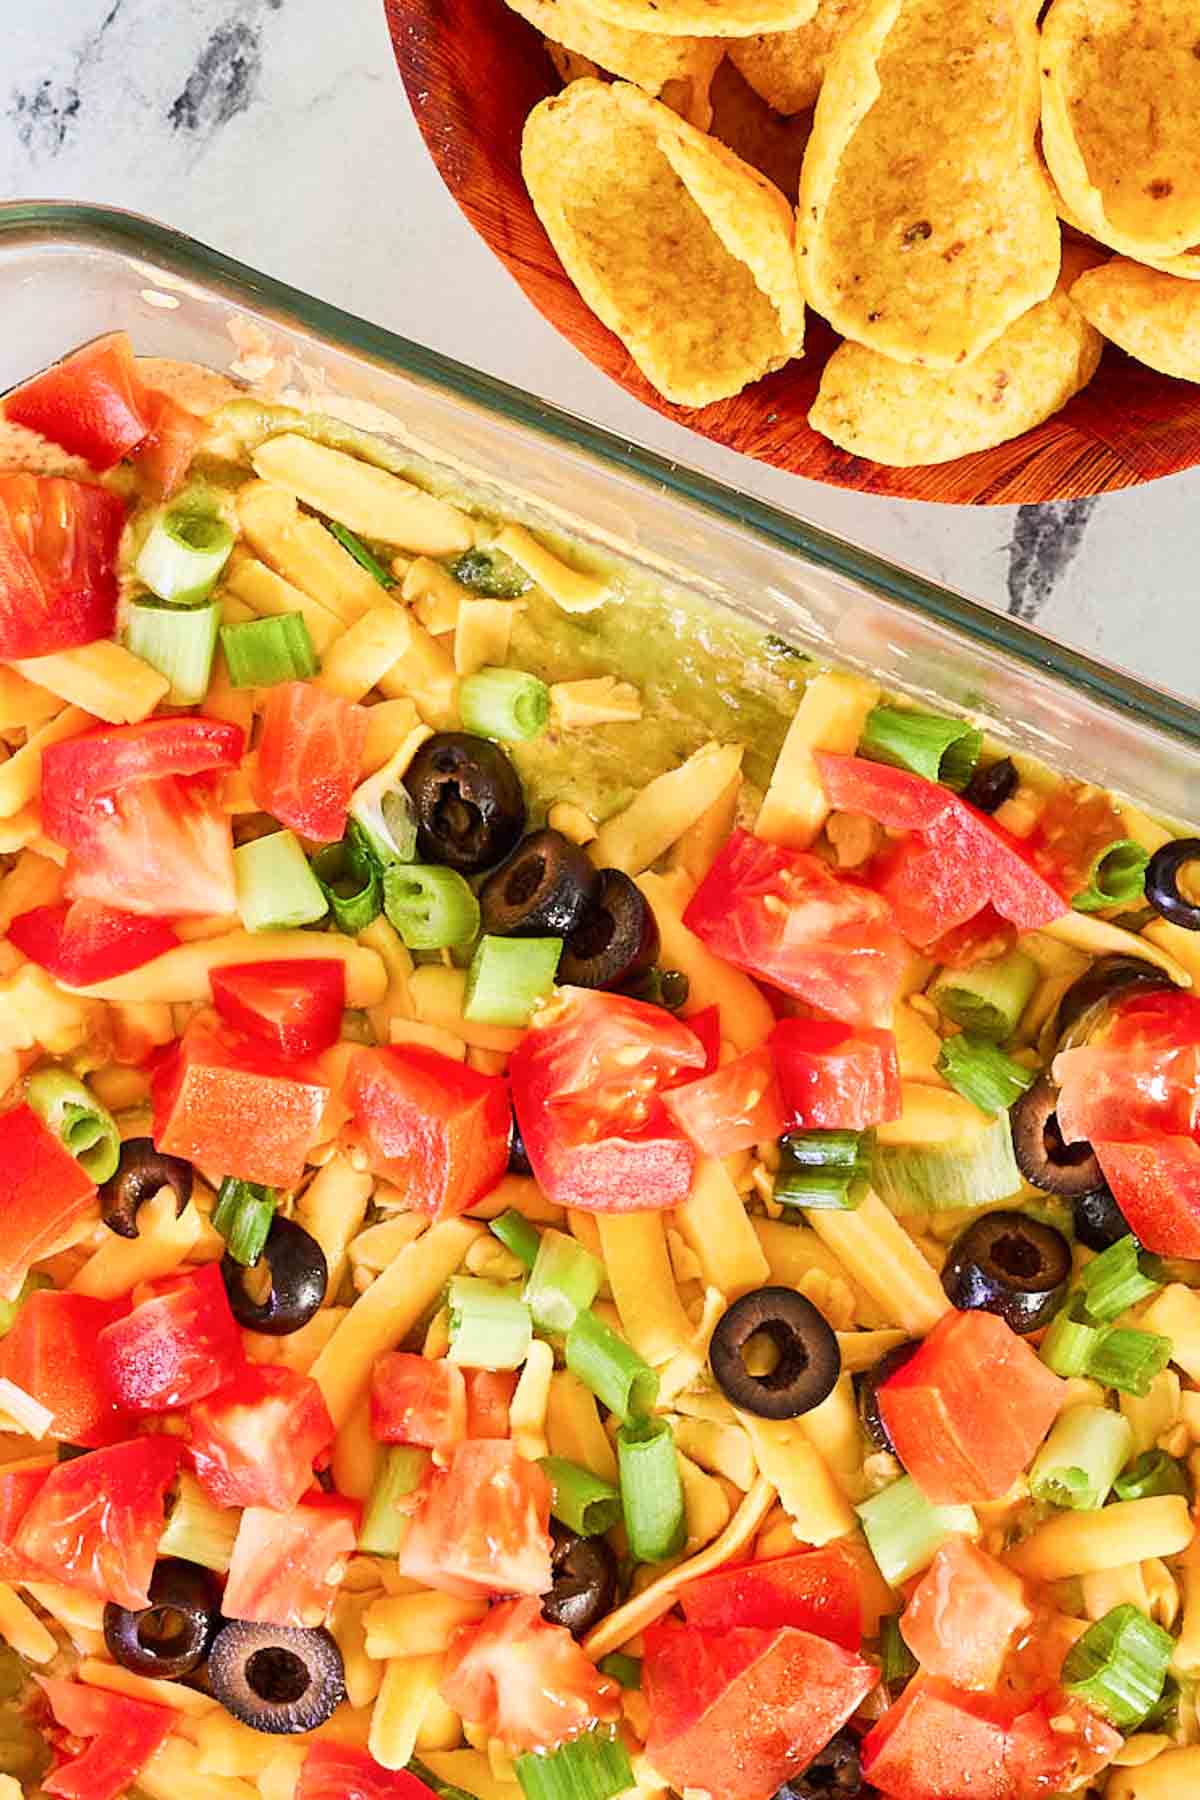 A bowl of corn chips next to taco dip with refried beans.